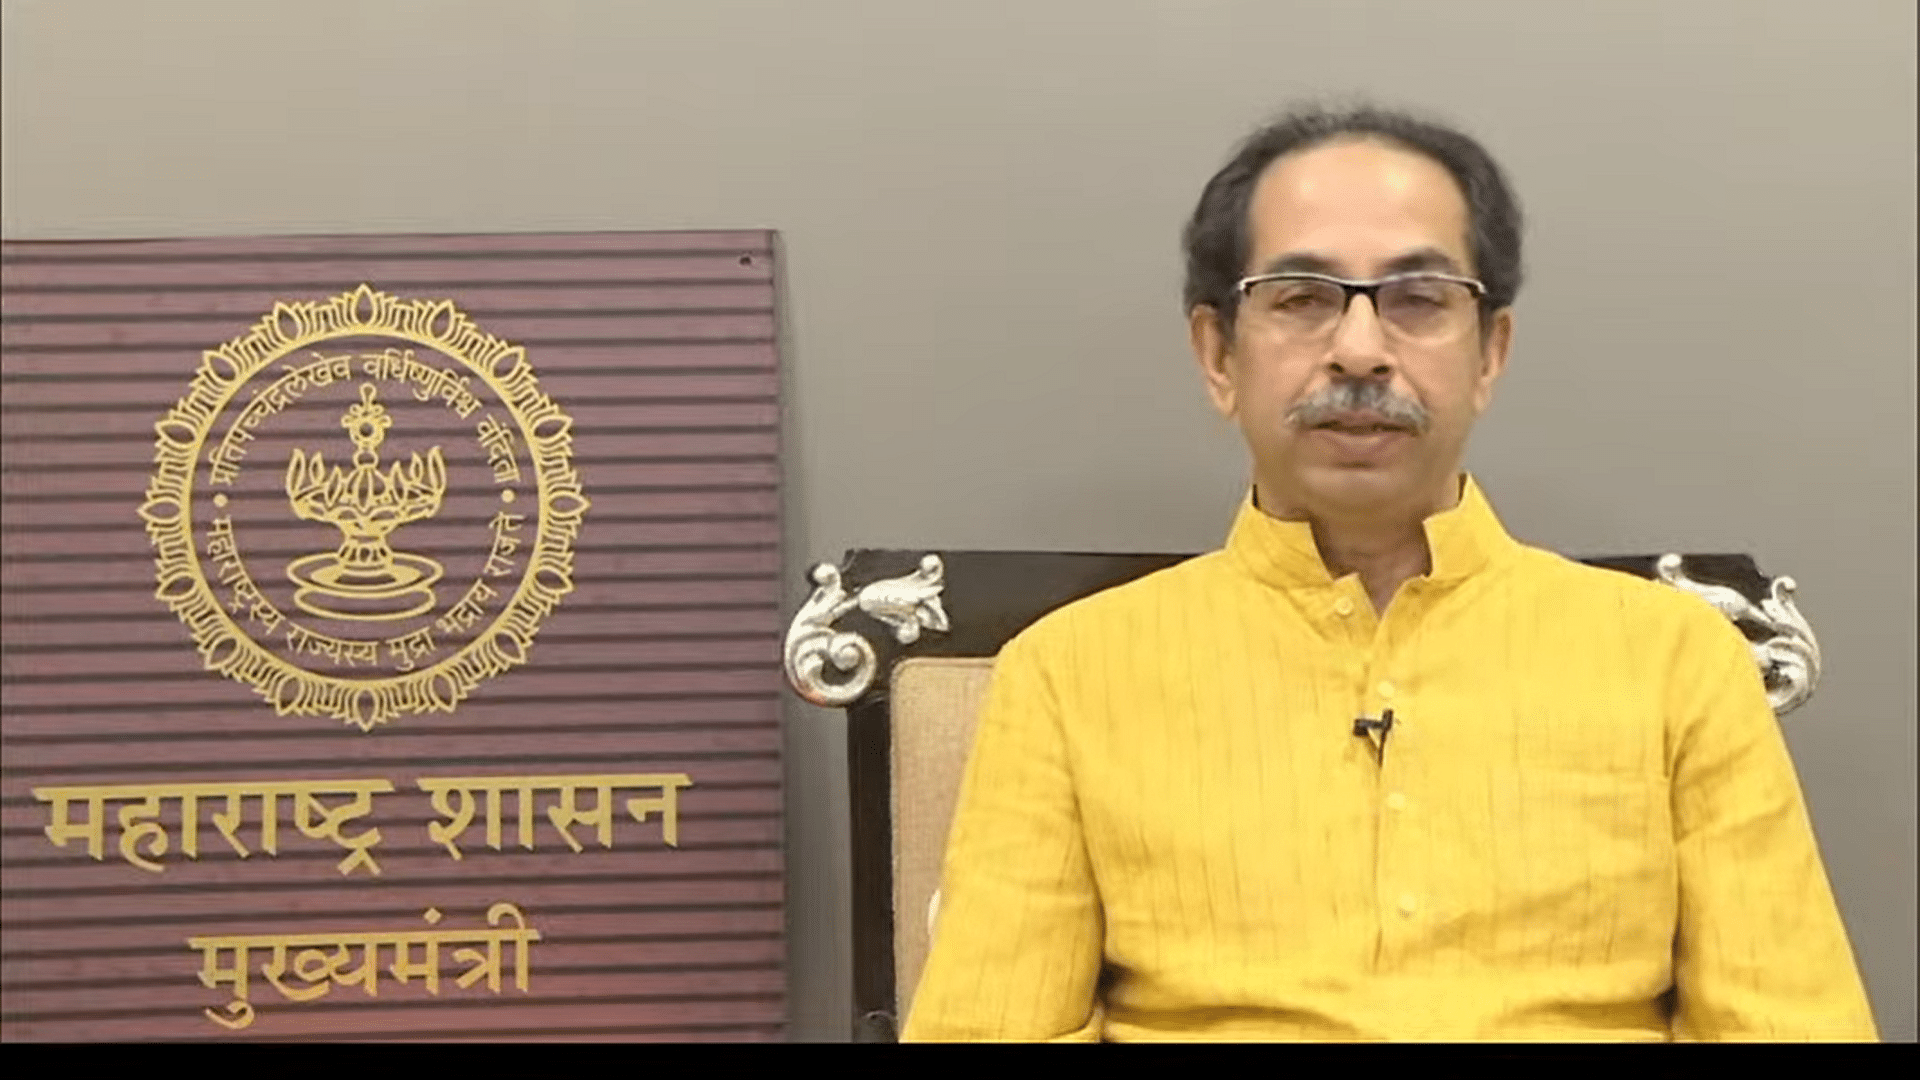 Maharashtra Chief Minister Uddhav Thackeray hinted at re-opening of schools and religious places in the state post the Diwali festivities, in his address to the state on Sunday, 8 November.